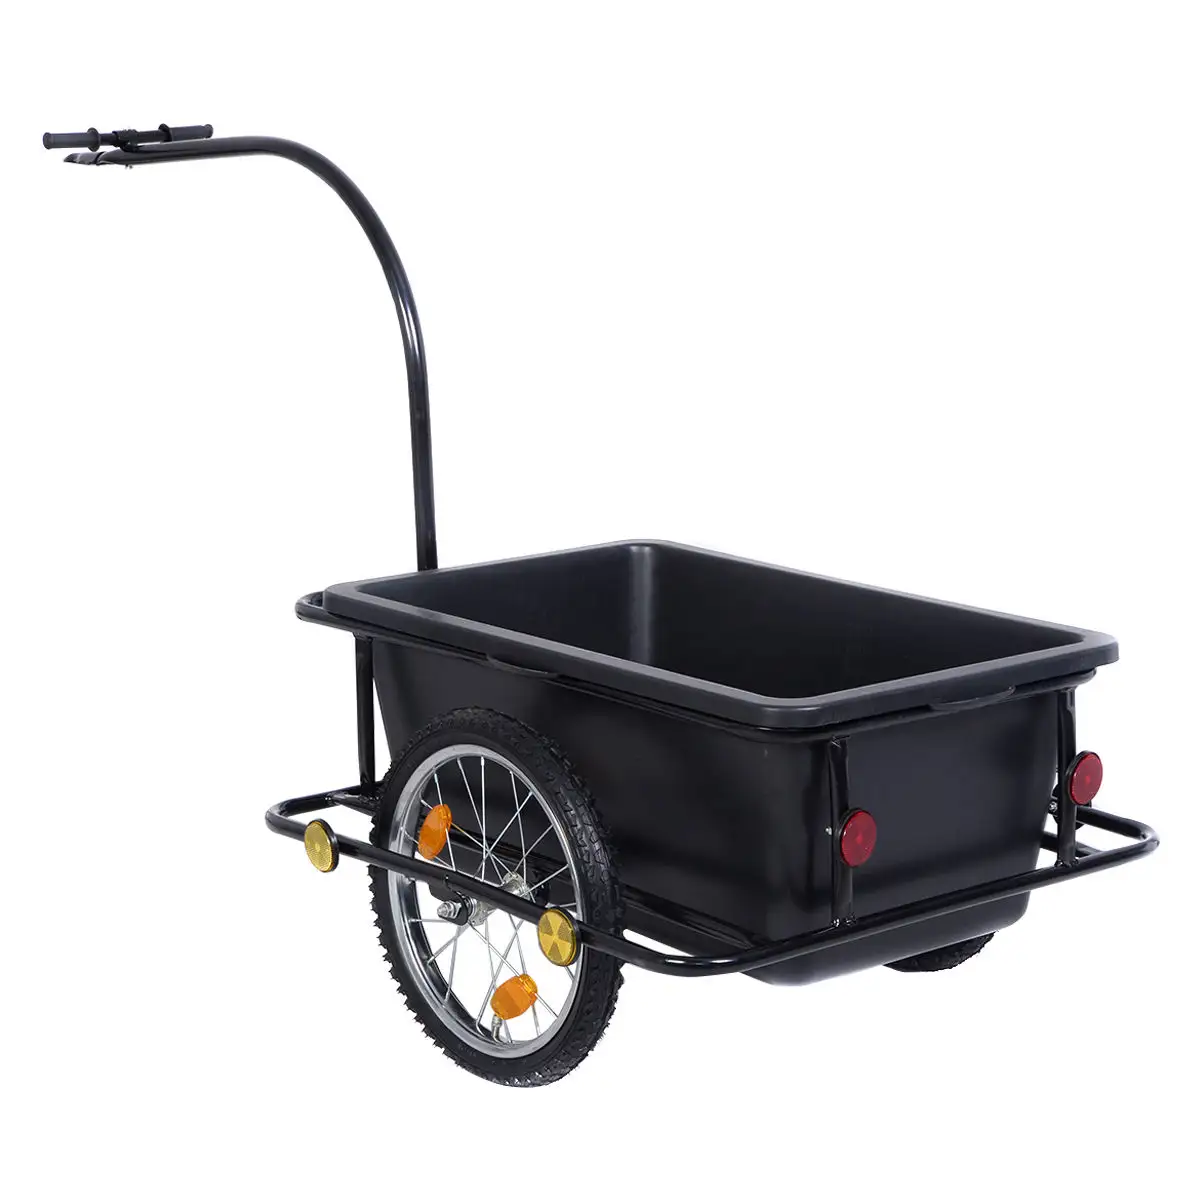 Bicycle Cycle Bike Cargo Trailer mit Fast Easy Quick Attaching Release Removing Hitch für Camping Luggage Carry